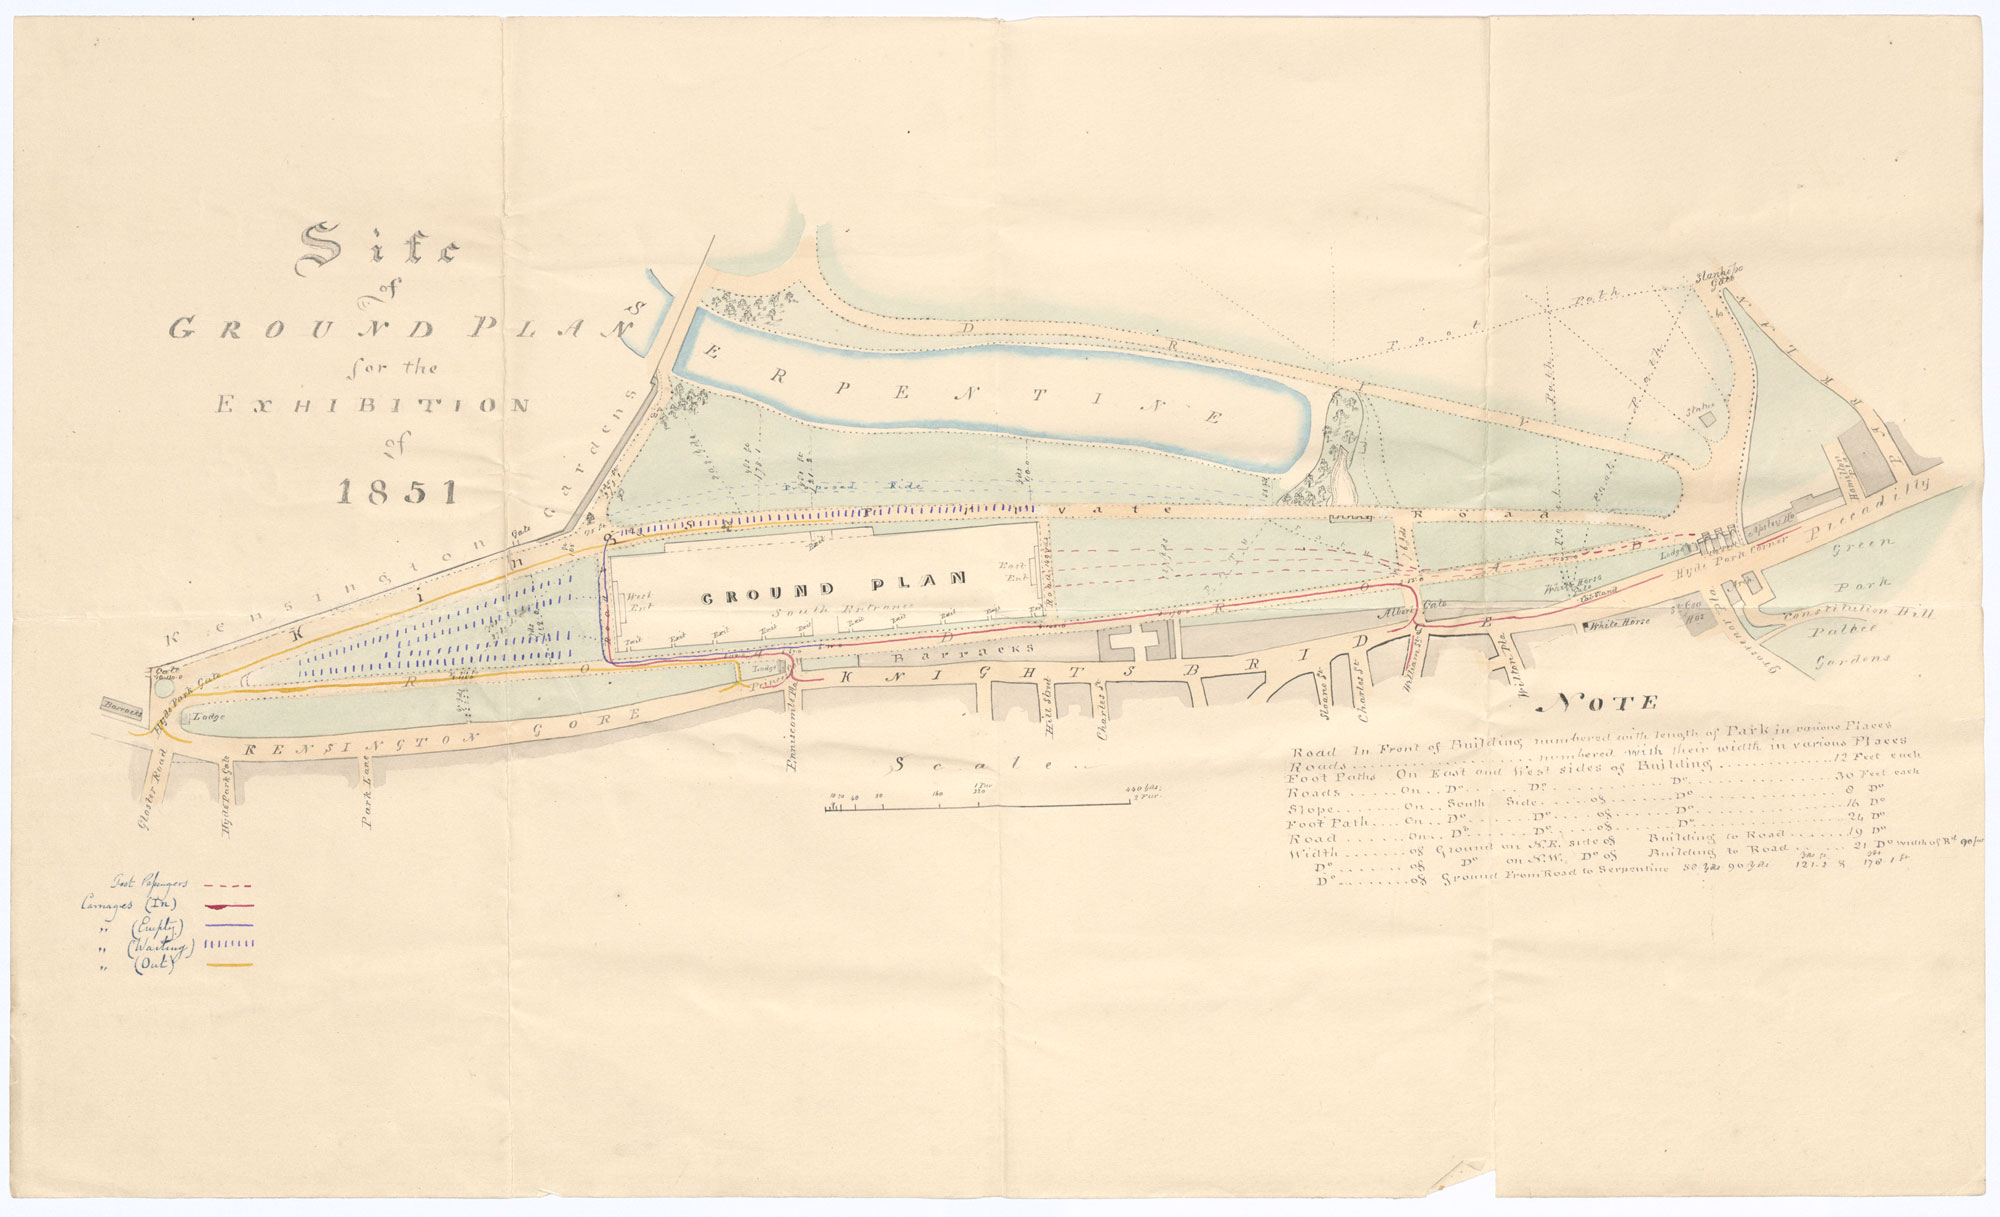 Site plan/map for the Great Exhibition in Hyde Park 1851 (HO 45/3051)